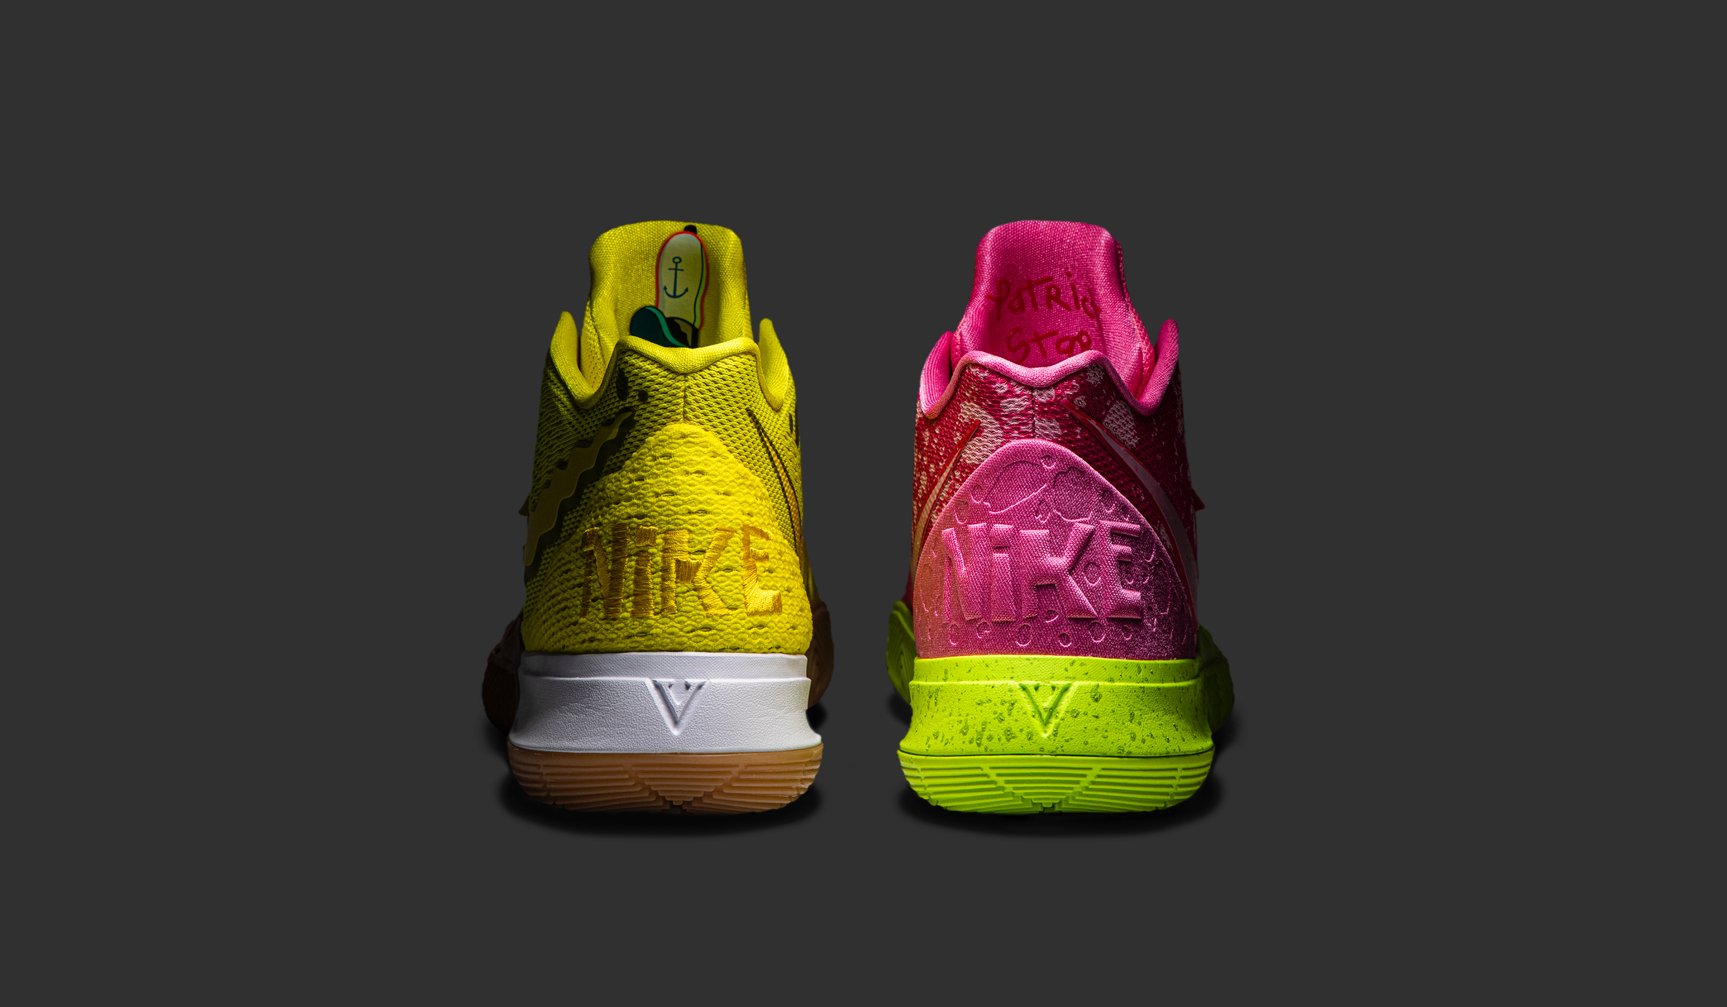 Imitación segmento Todo el tiempo GOAT on Twitter: "Citing his love for the show growing up, Kyrie Irving,  Nike and Nickelodeon team up to produce a set of SpongeBob Squarepants  inspired sneakers. Available on the app and